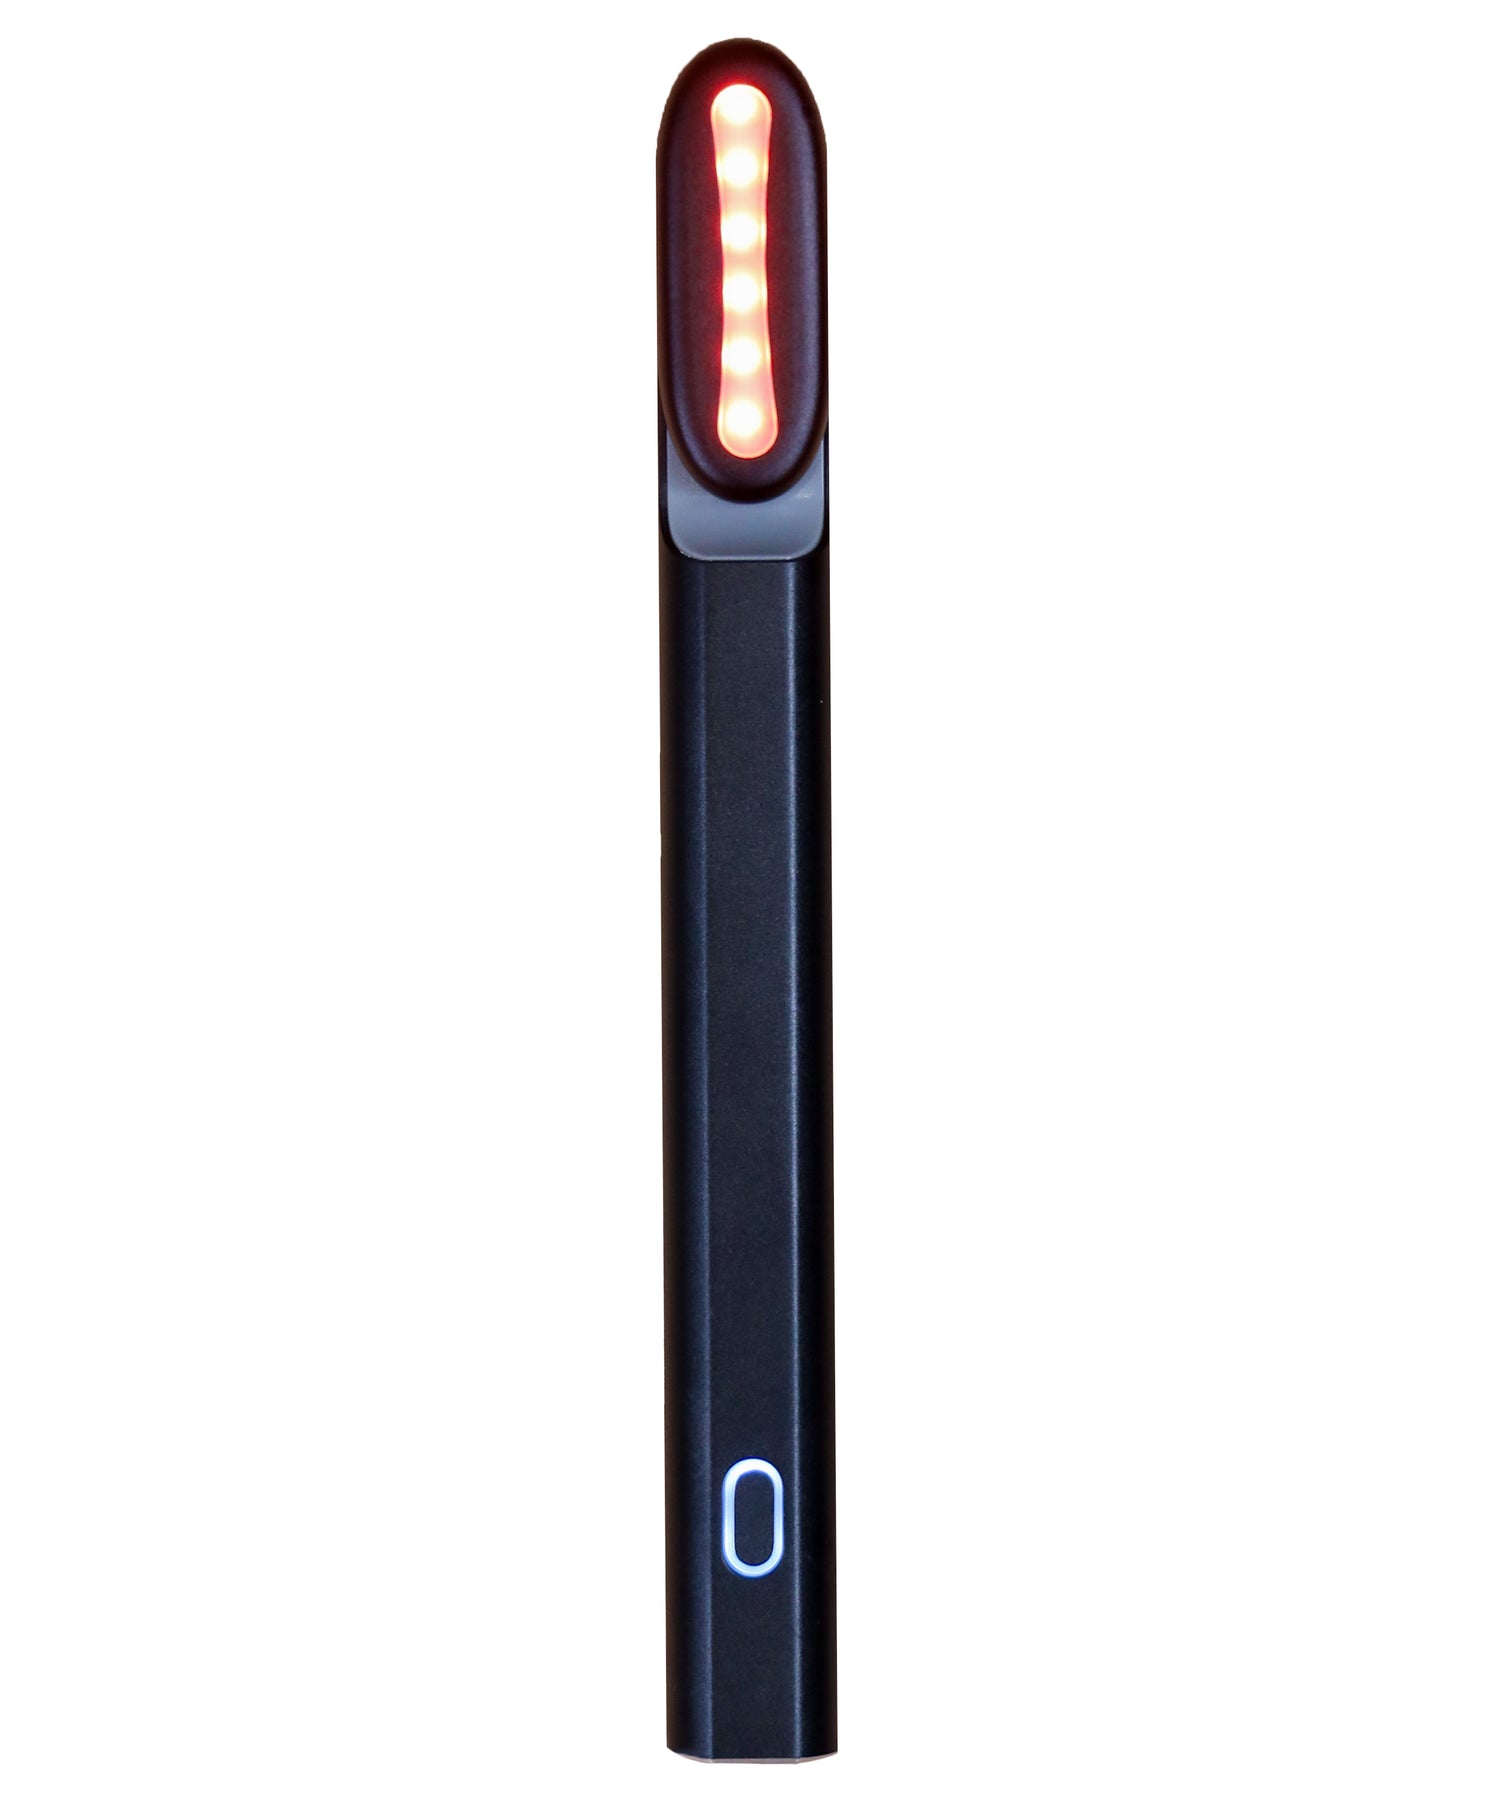 Close-up of the LONVITALITE PRO LED Facial Wand with red and blue light options